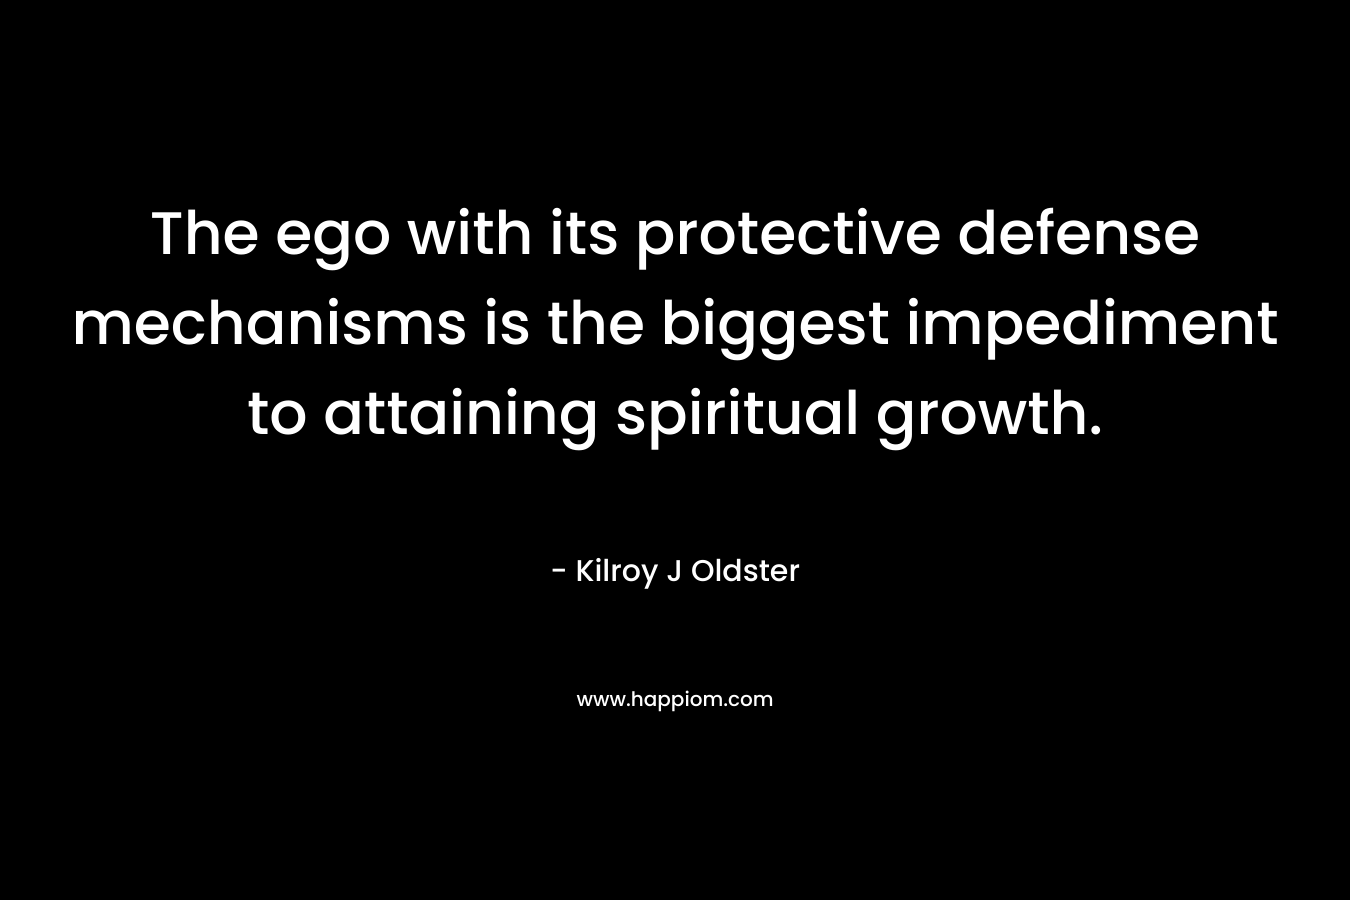 The ego with its protective defense mechanisms is the biggest impediment to attaining spiritual growth.